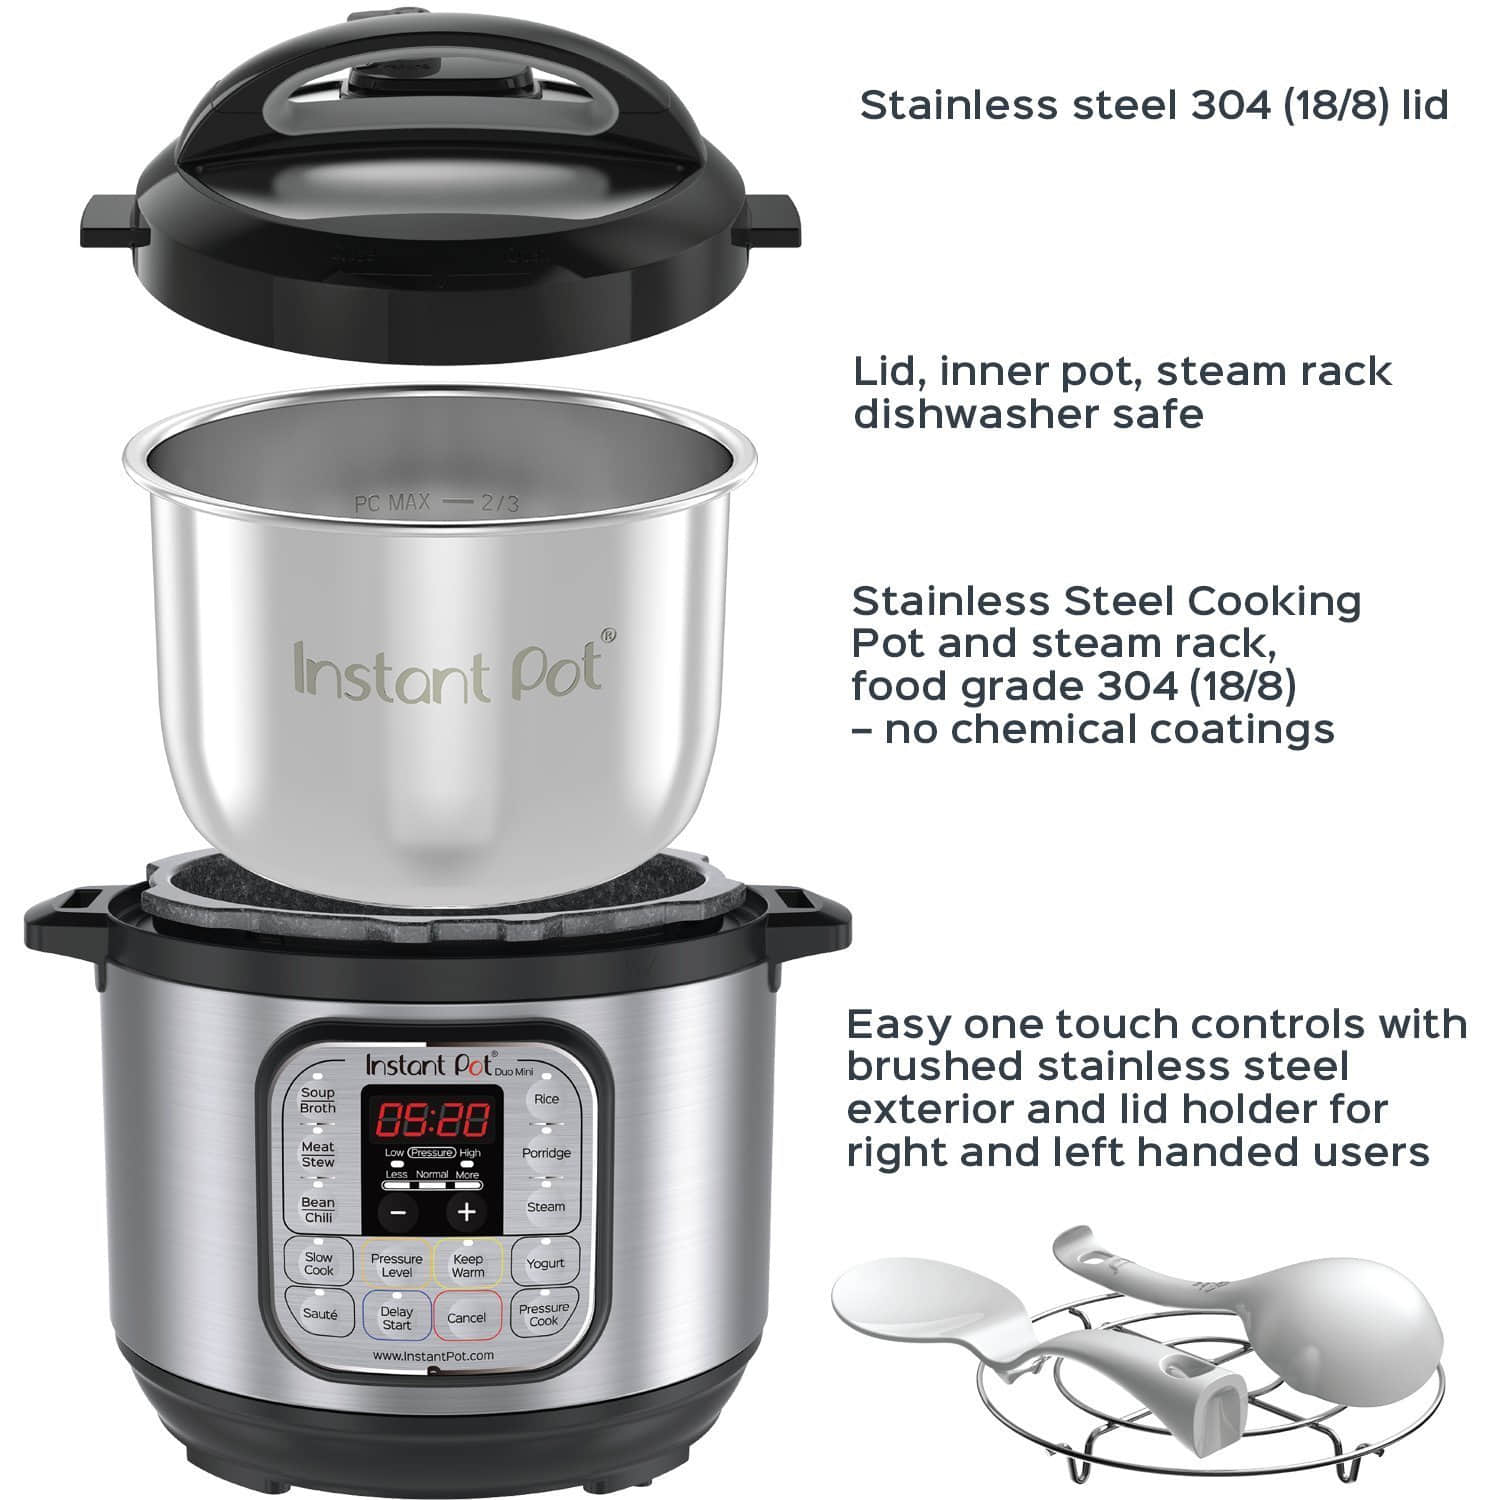 Instant Pot Duo Mini 3 Qt 7-in-1 Multi- Use Programmable Pressure Cooker, Slow Cooker, Rice Cooker, Steamer, Sauté, Yogurt Maker and Warmer